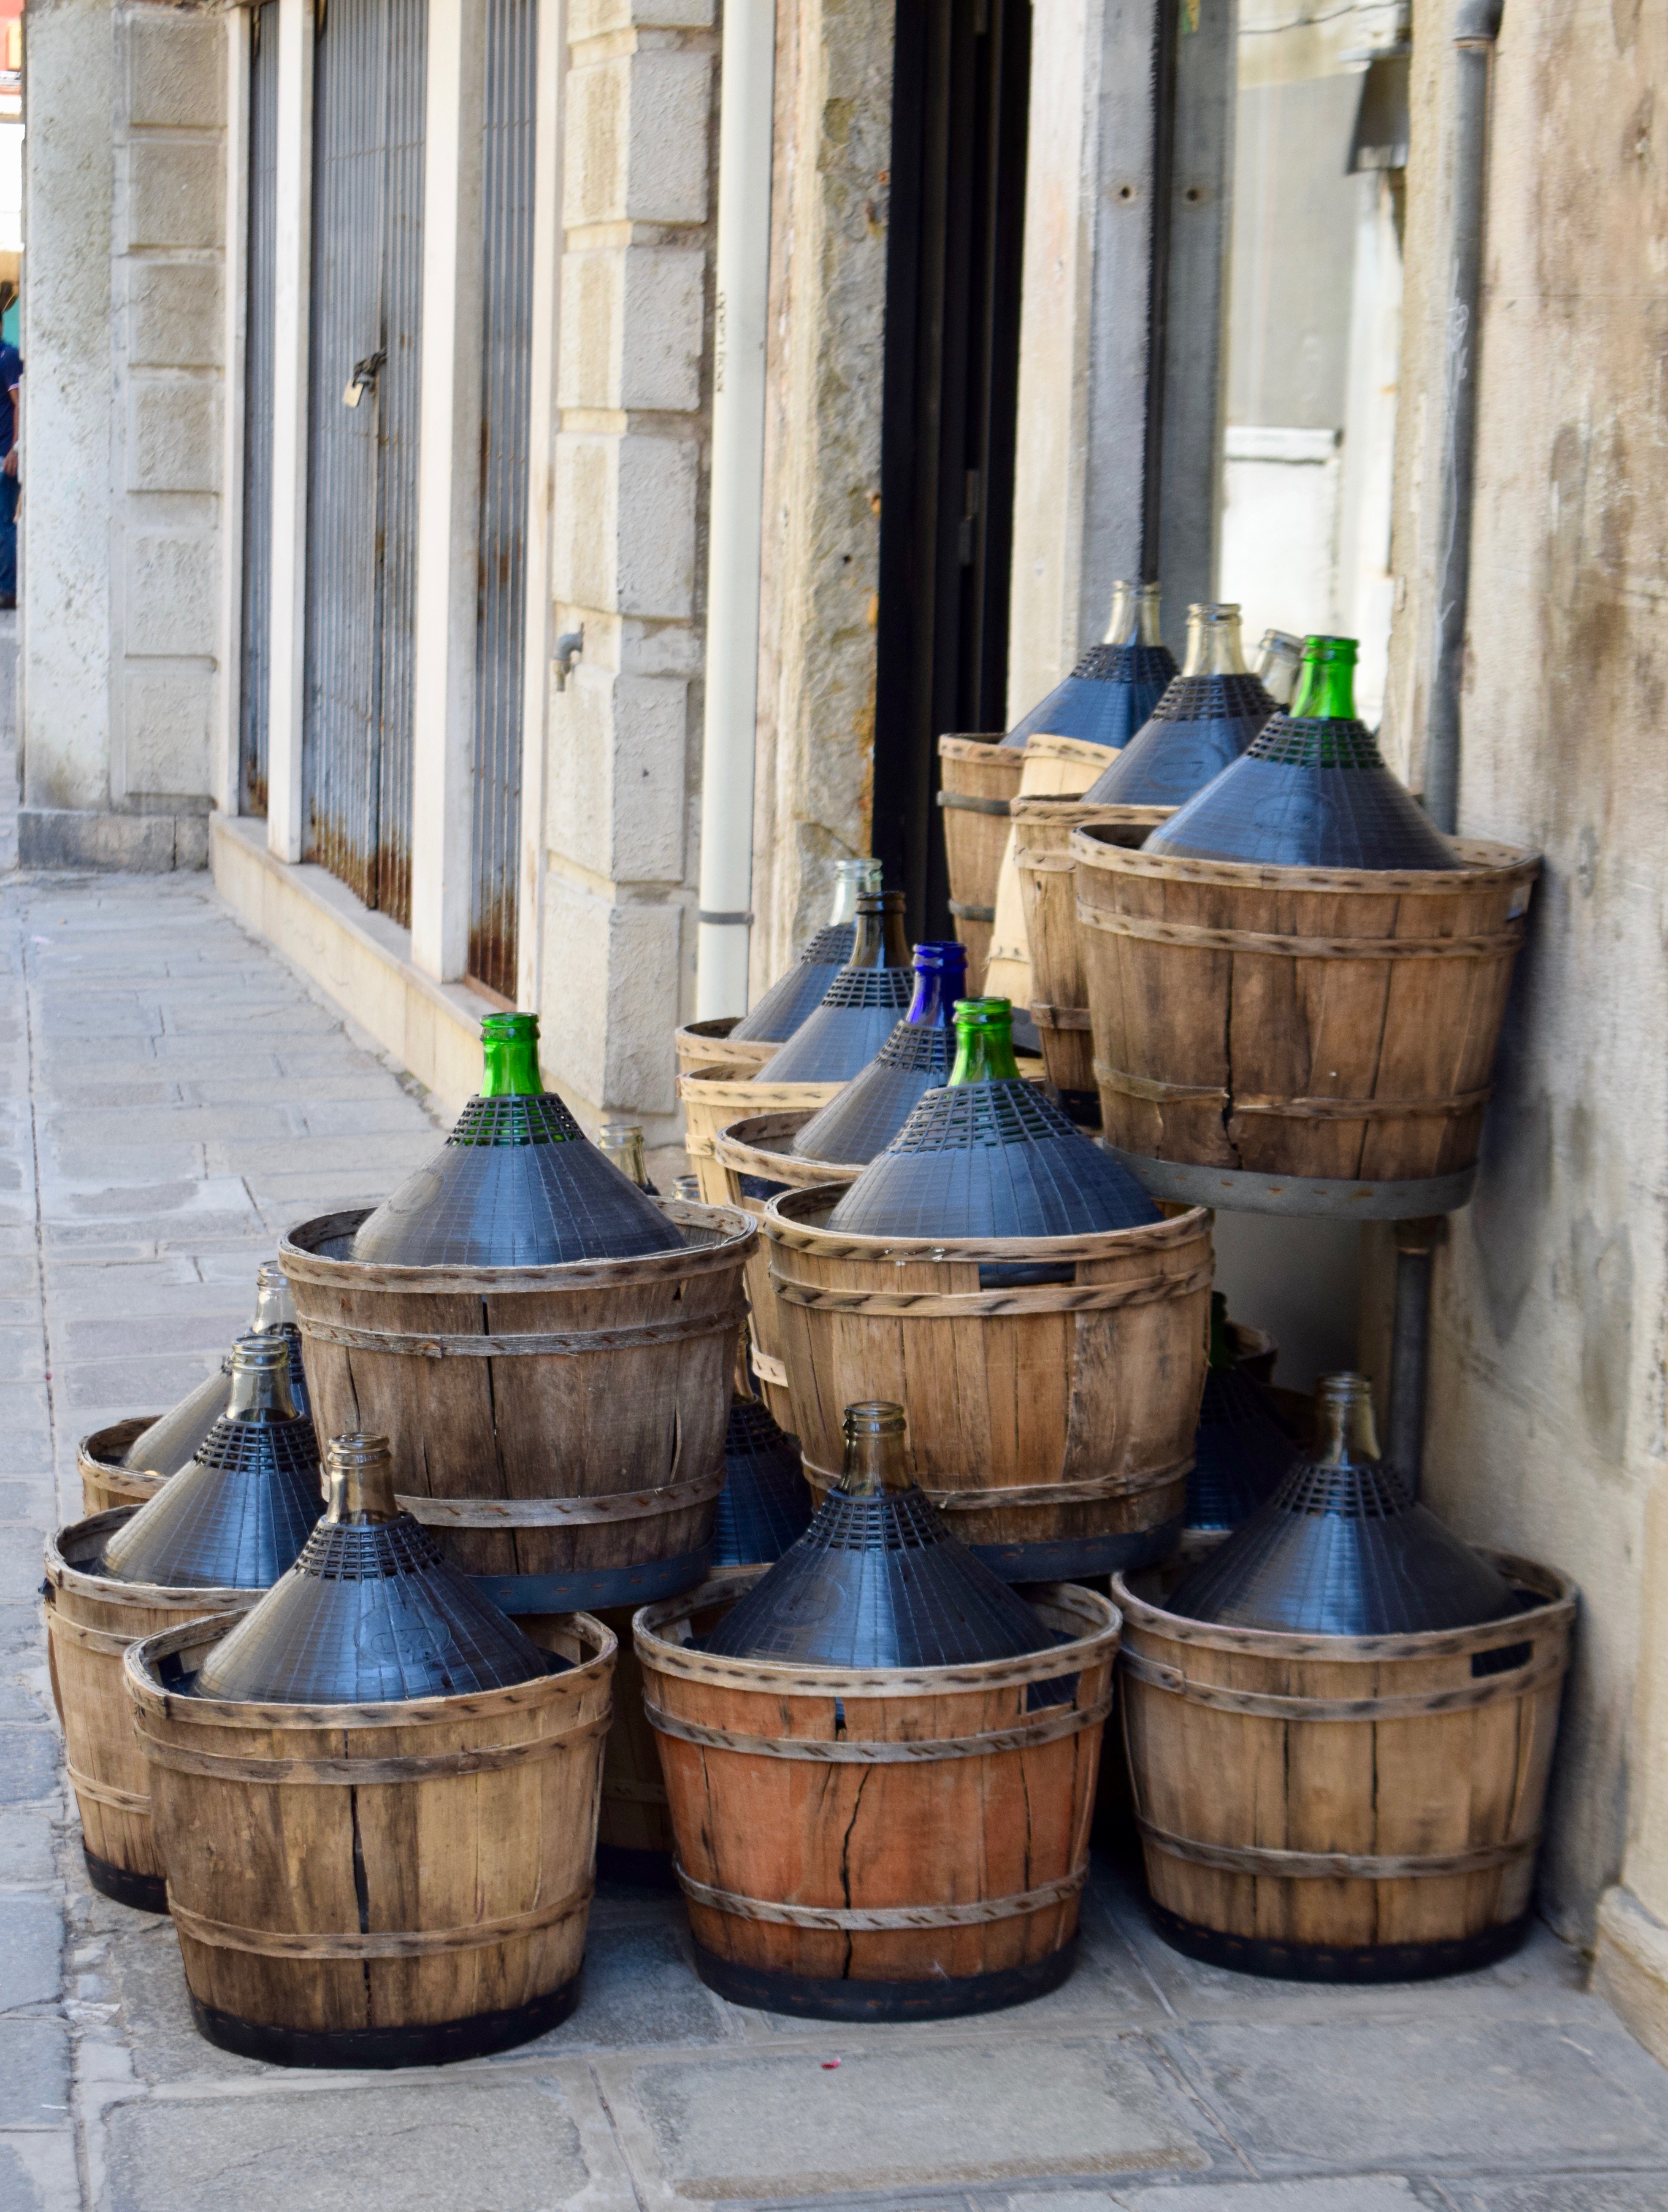 It's the weekend, number 111, Wine Jugs Outside a Store in Venice